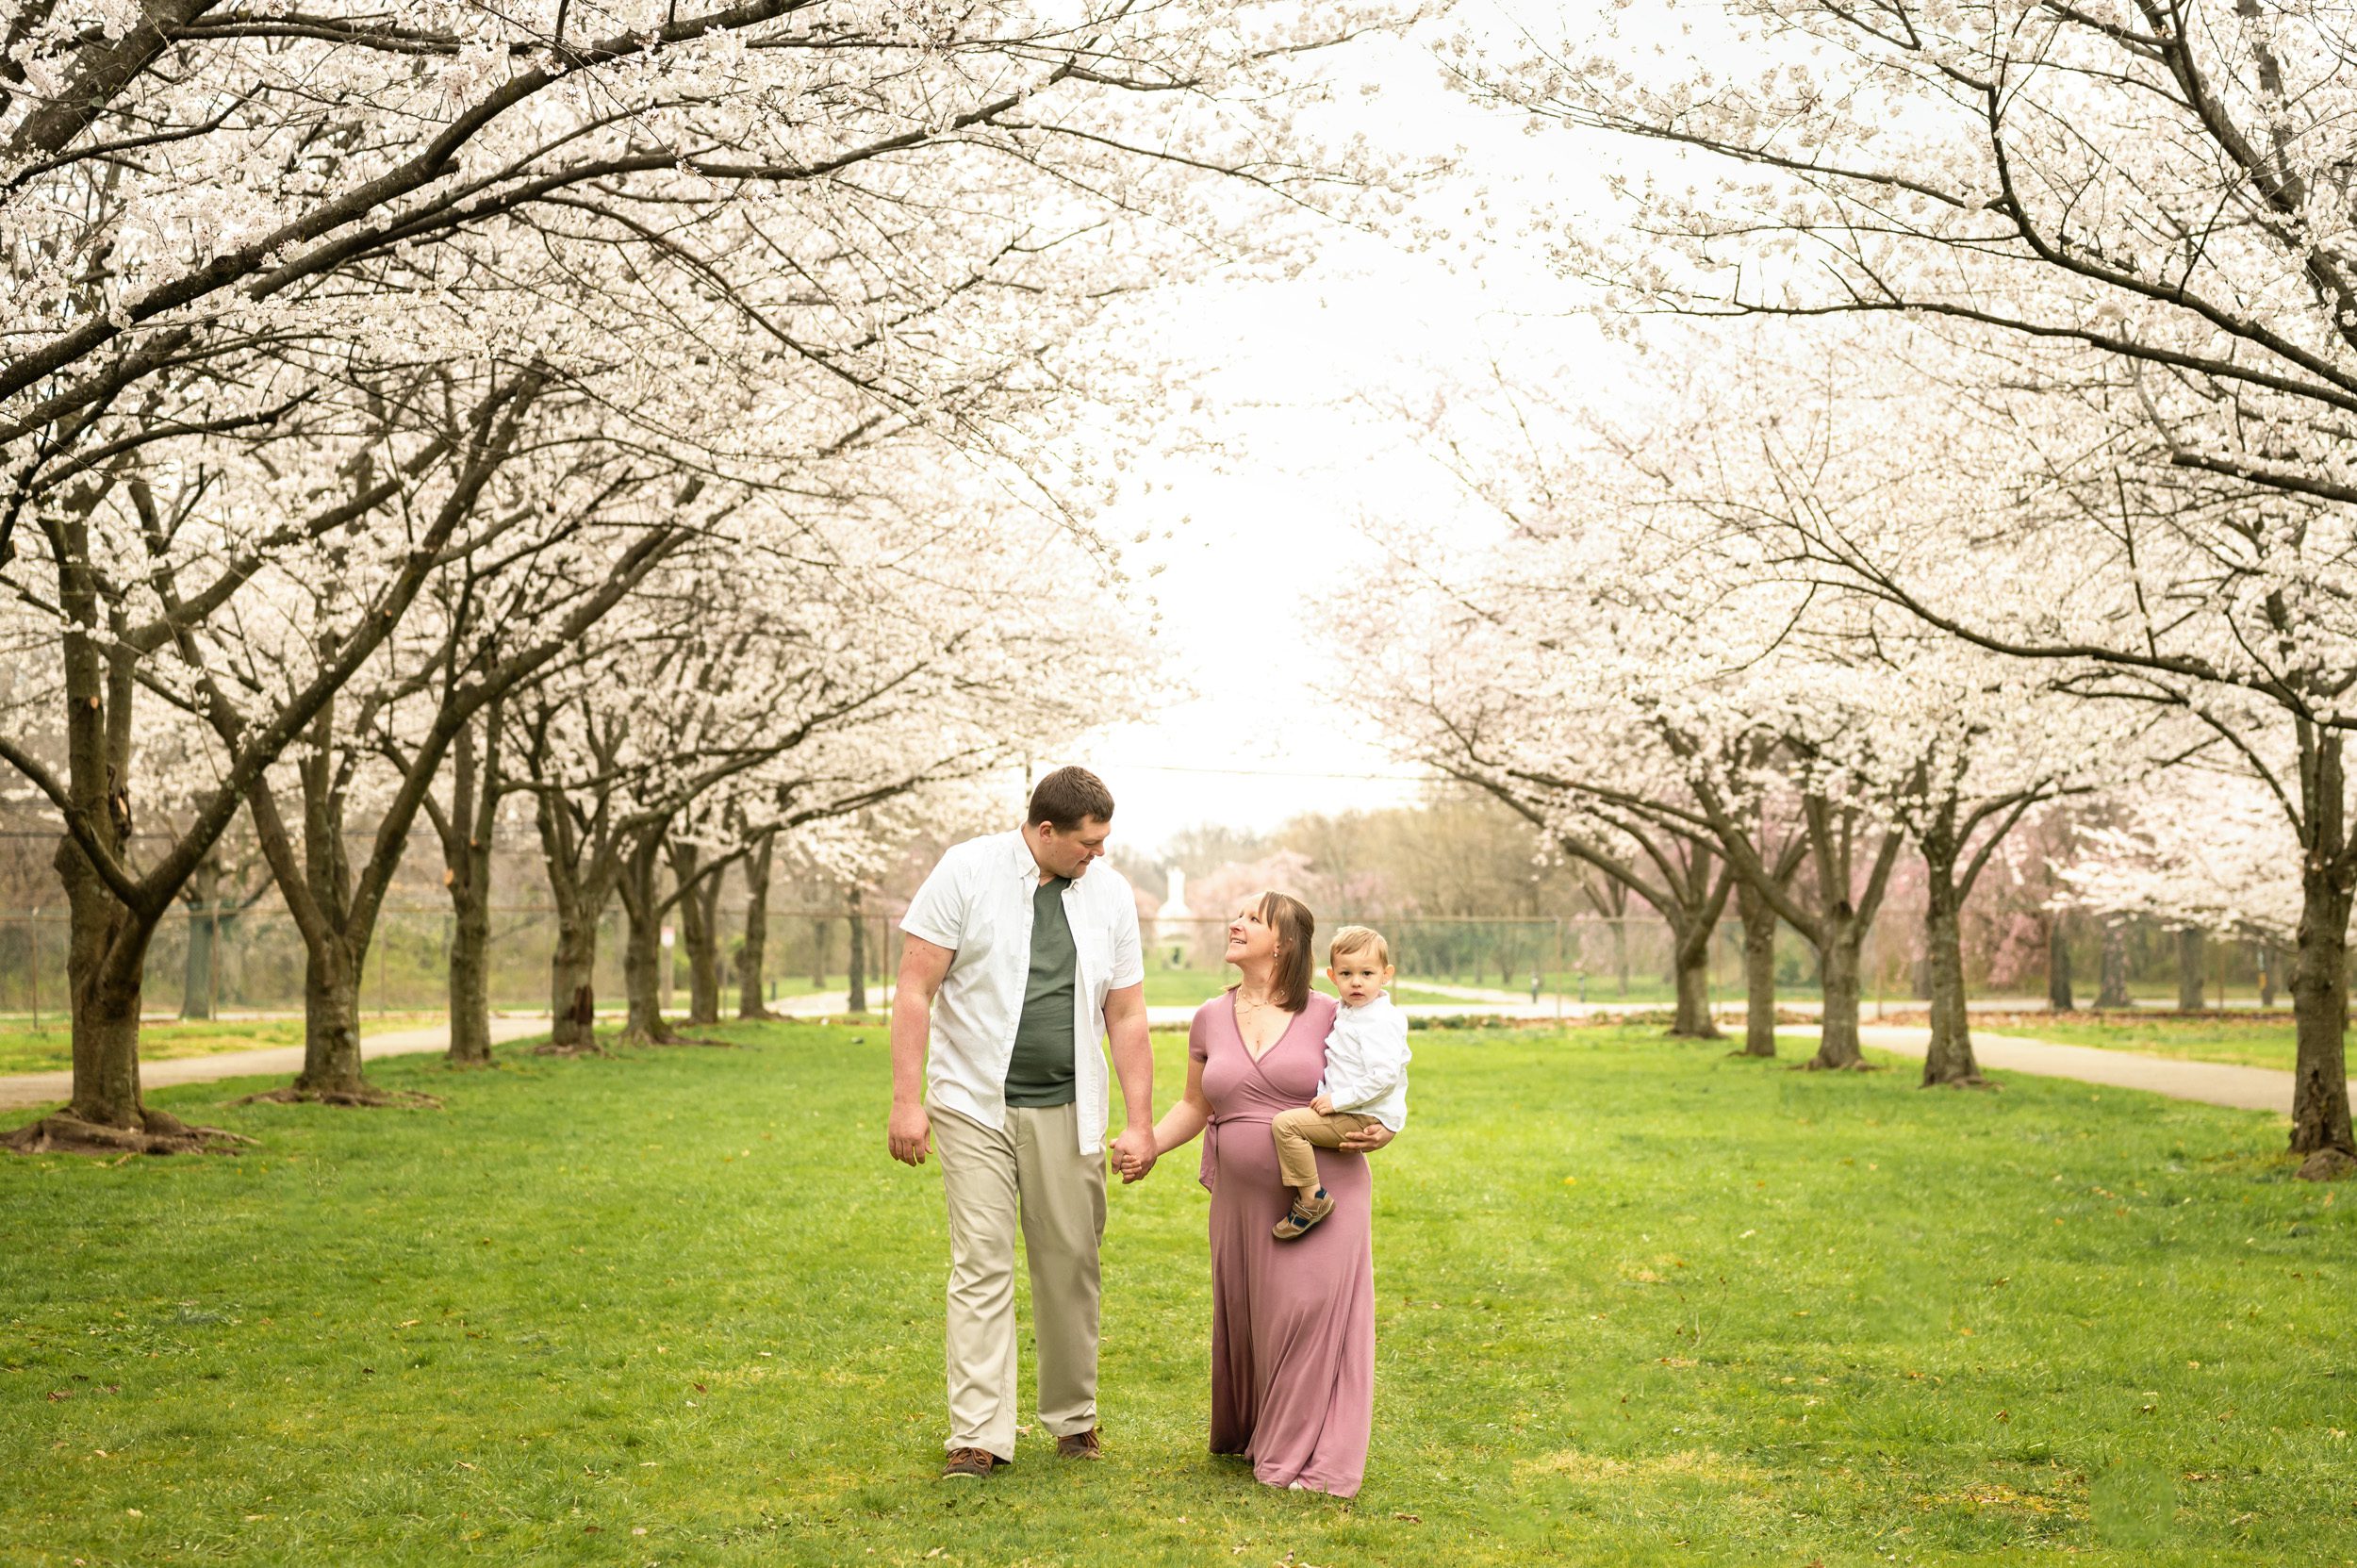 An expecting mom holding her young son on her hip and smiling up at dad as they walk in a field lined with cherry blossom trees in bloom during a spring photo session